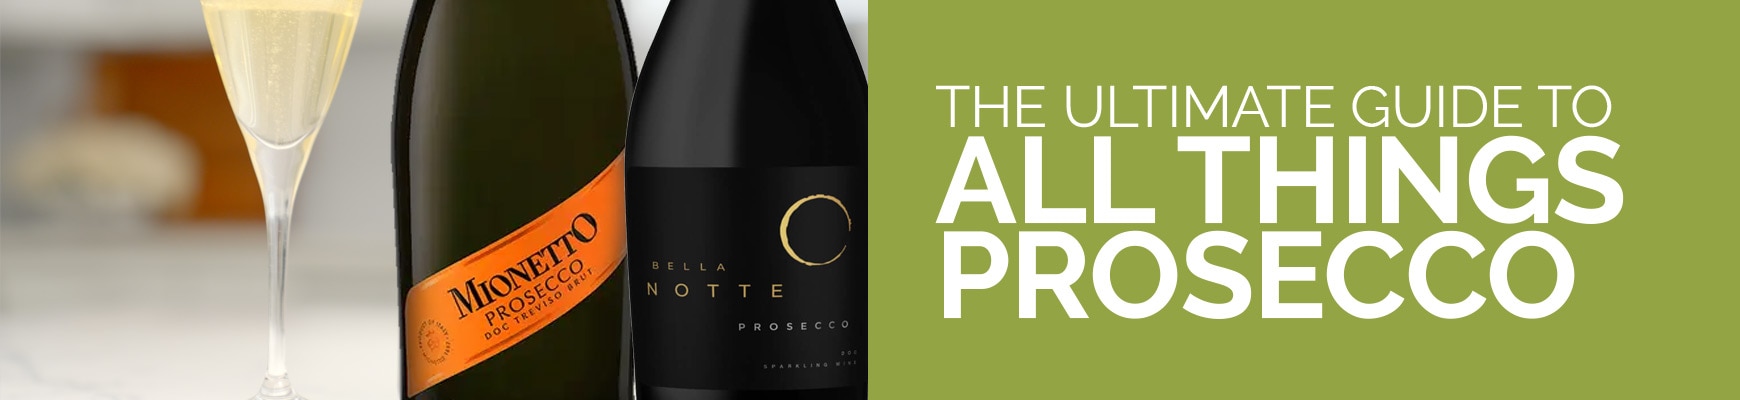 The Ultimate Guide to All Things Prosecco